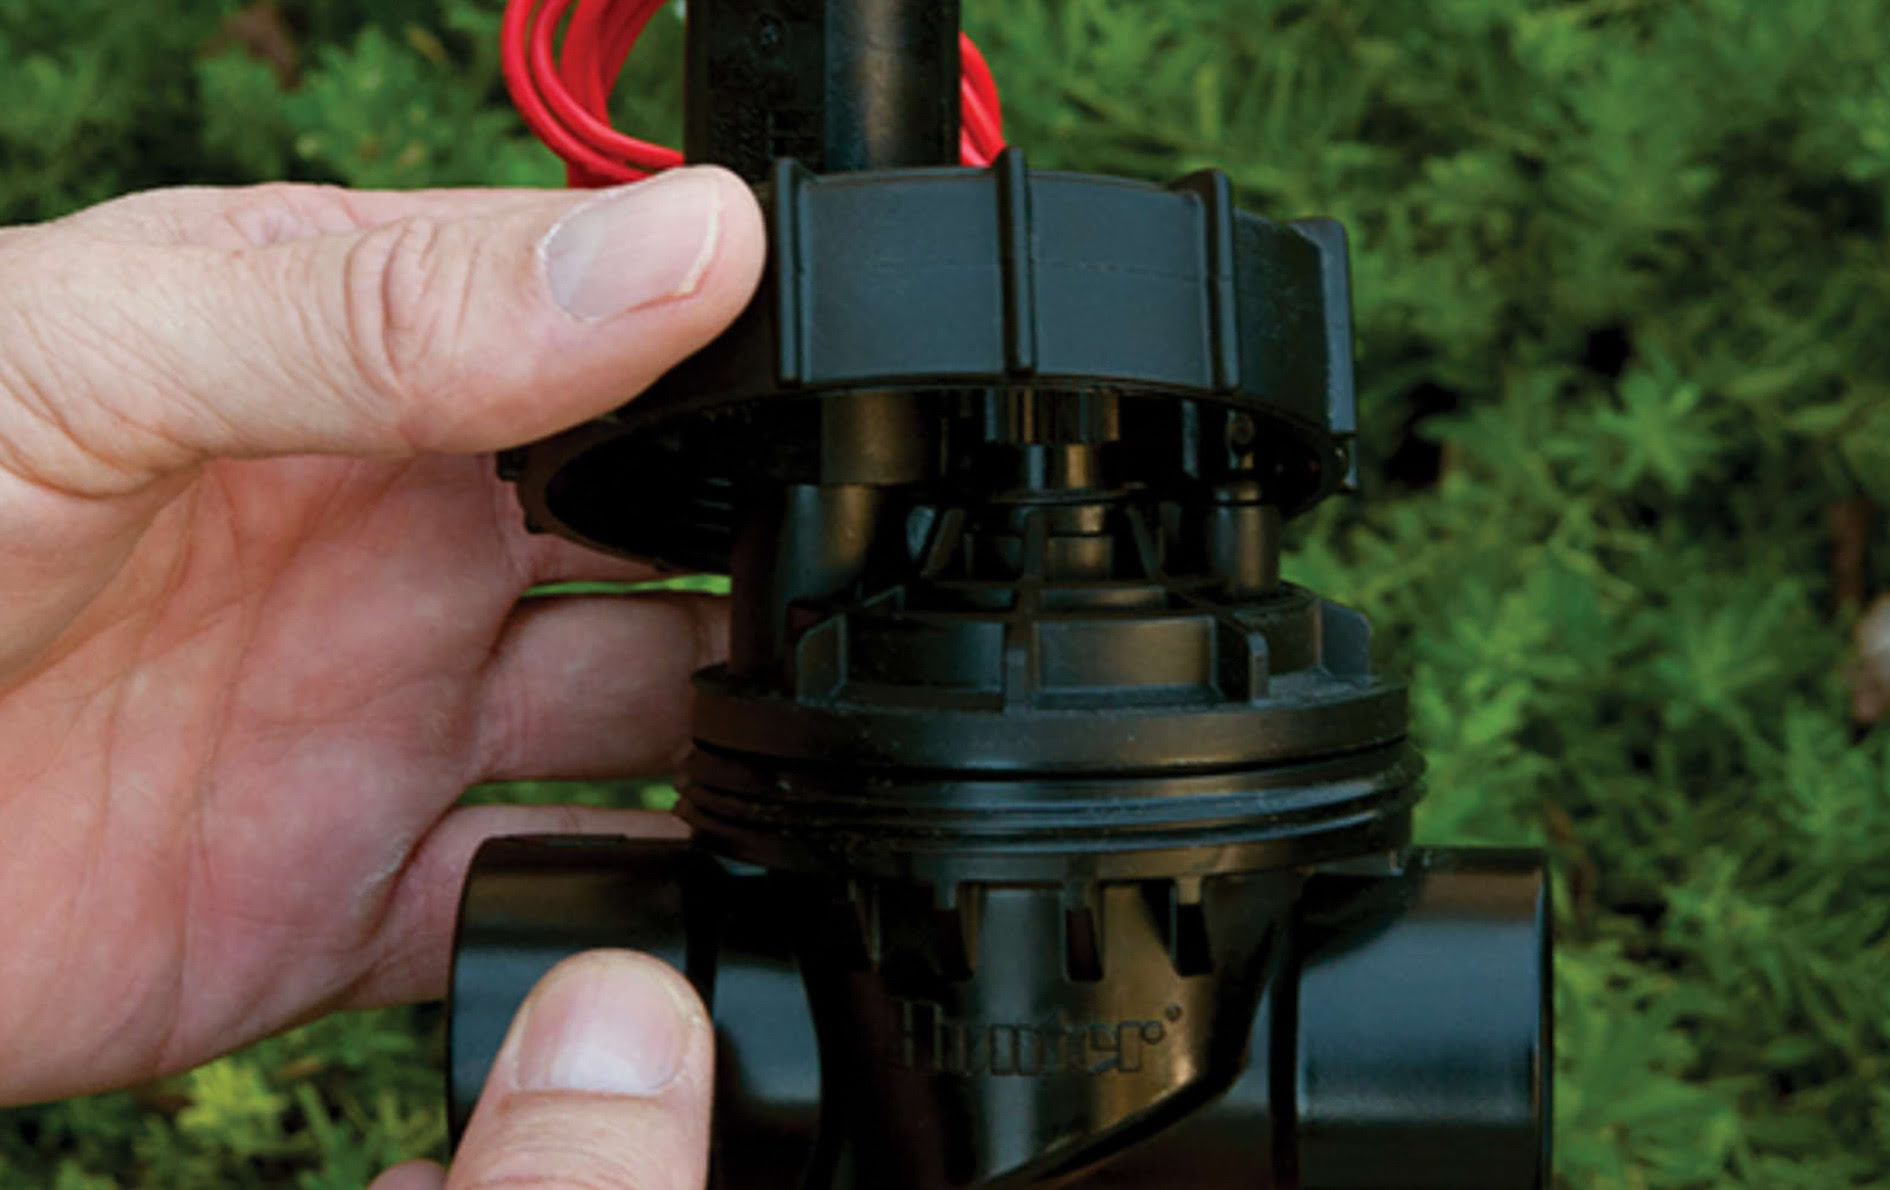 How To Turn On Irrigation Valve Manually